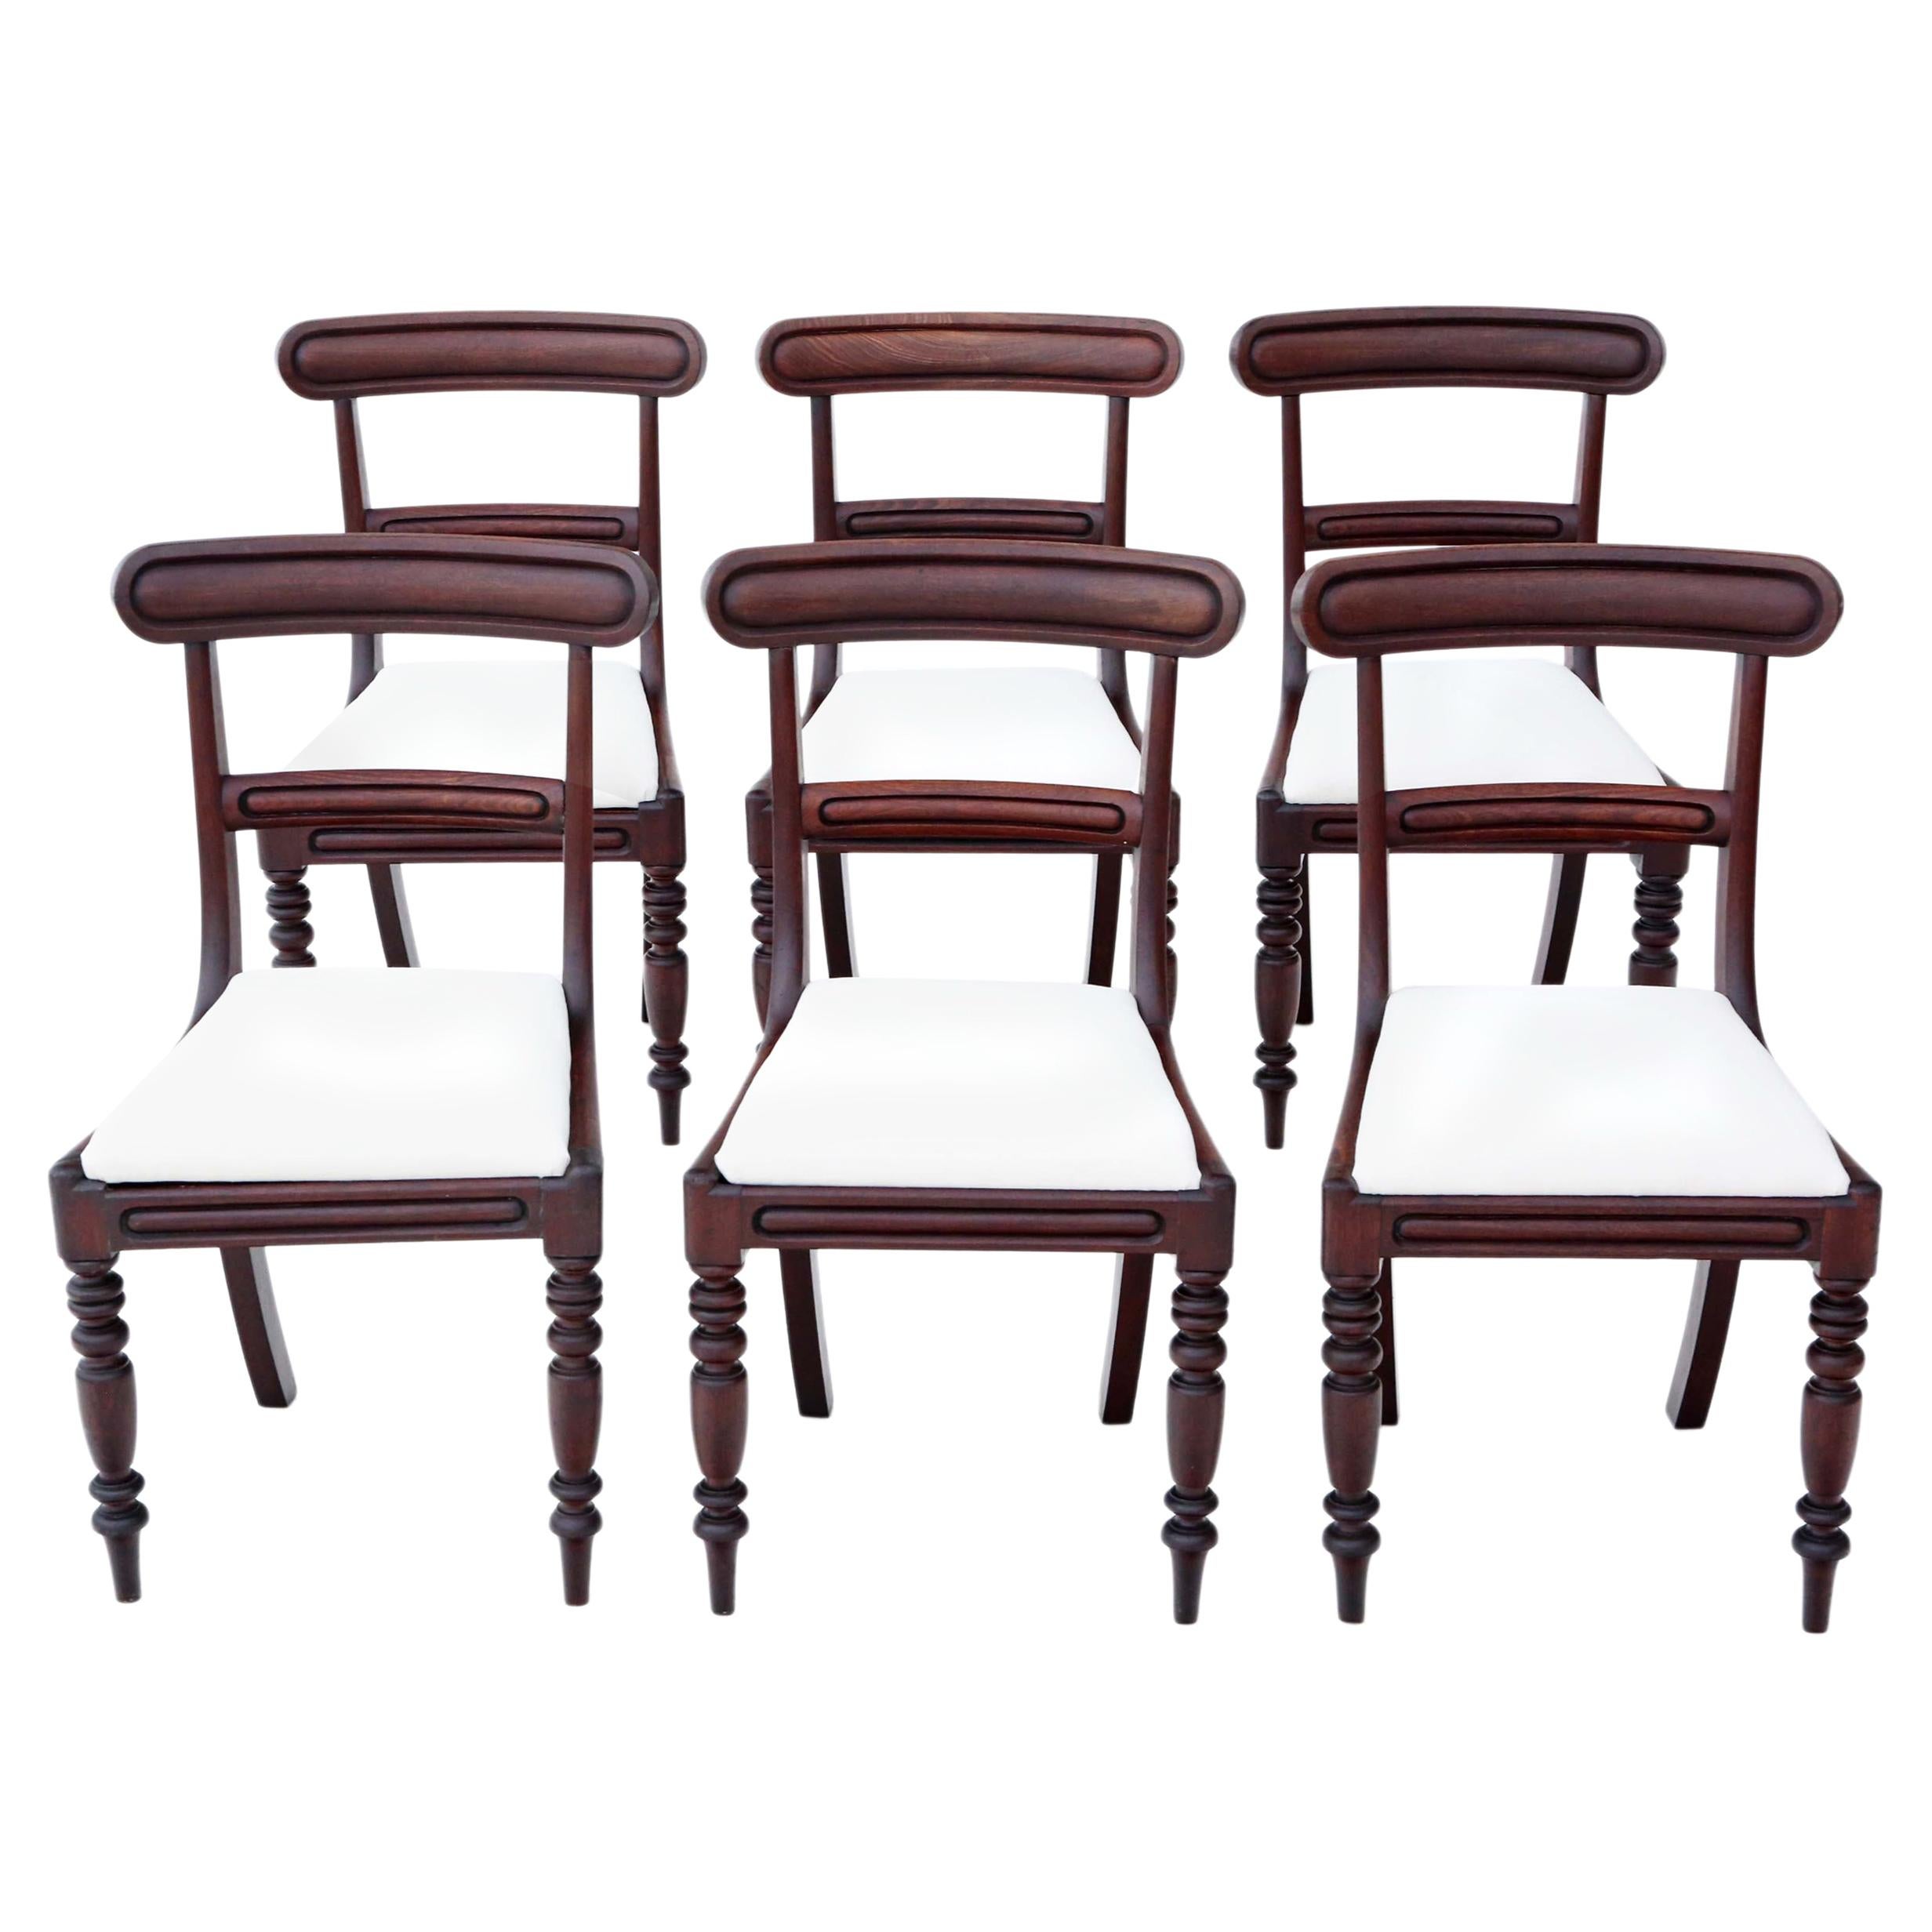 Antique circa 1850 Set of 6 Victorian Mahogany Dining Chairs For Sale